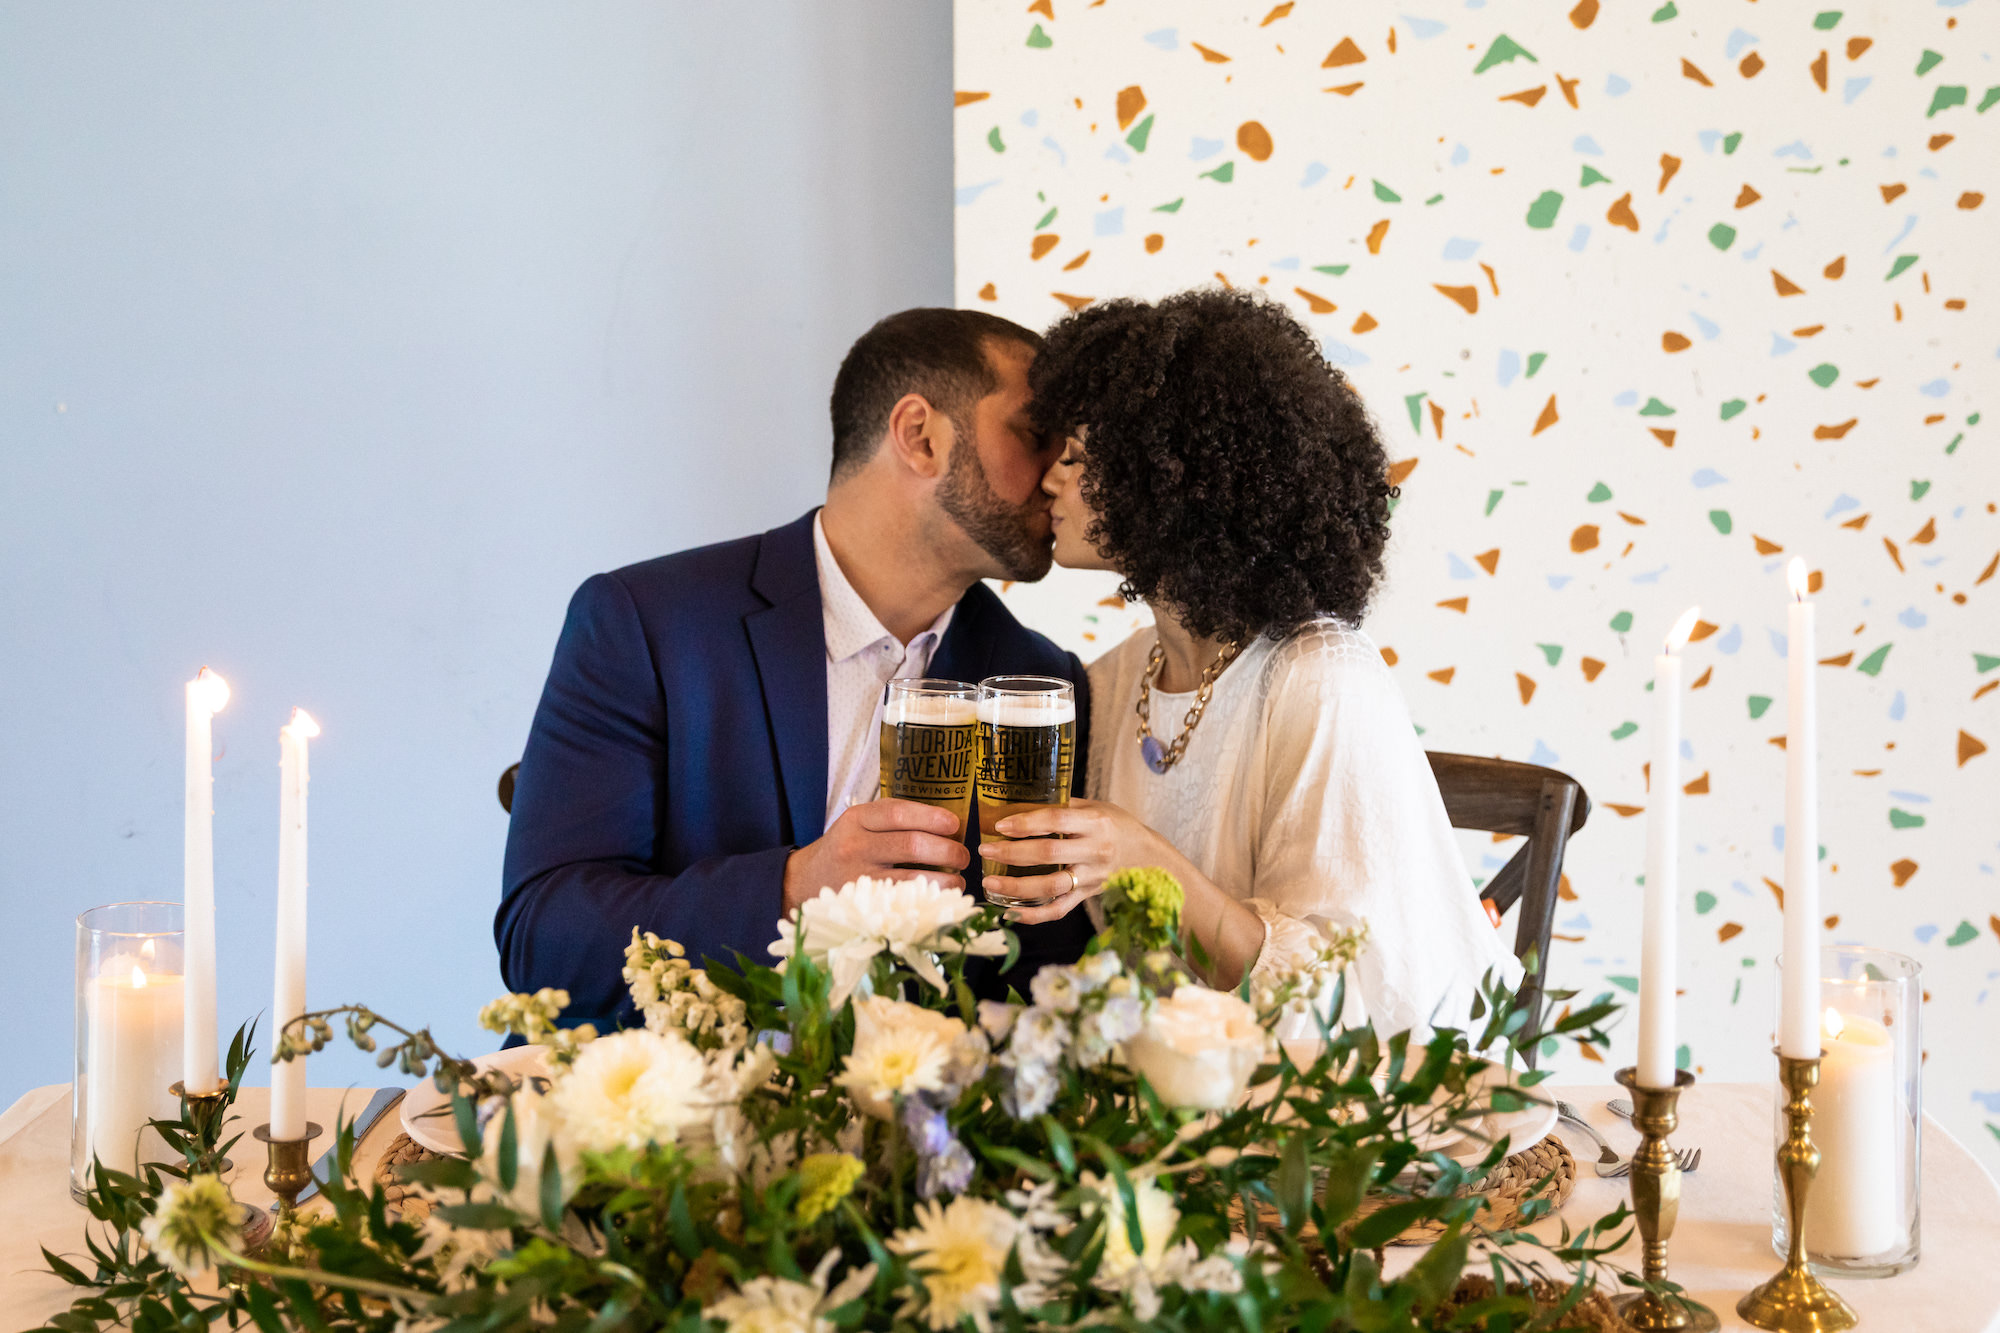 Modern Whimsical Bride and Groom with Beers, Light Blue and Terrazzo Panel Backdrops, Vintage Gold Candlesticks, Lush Greenery and White Flowers